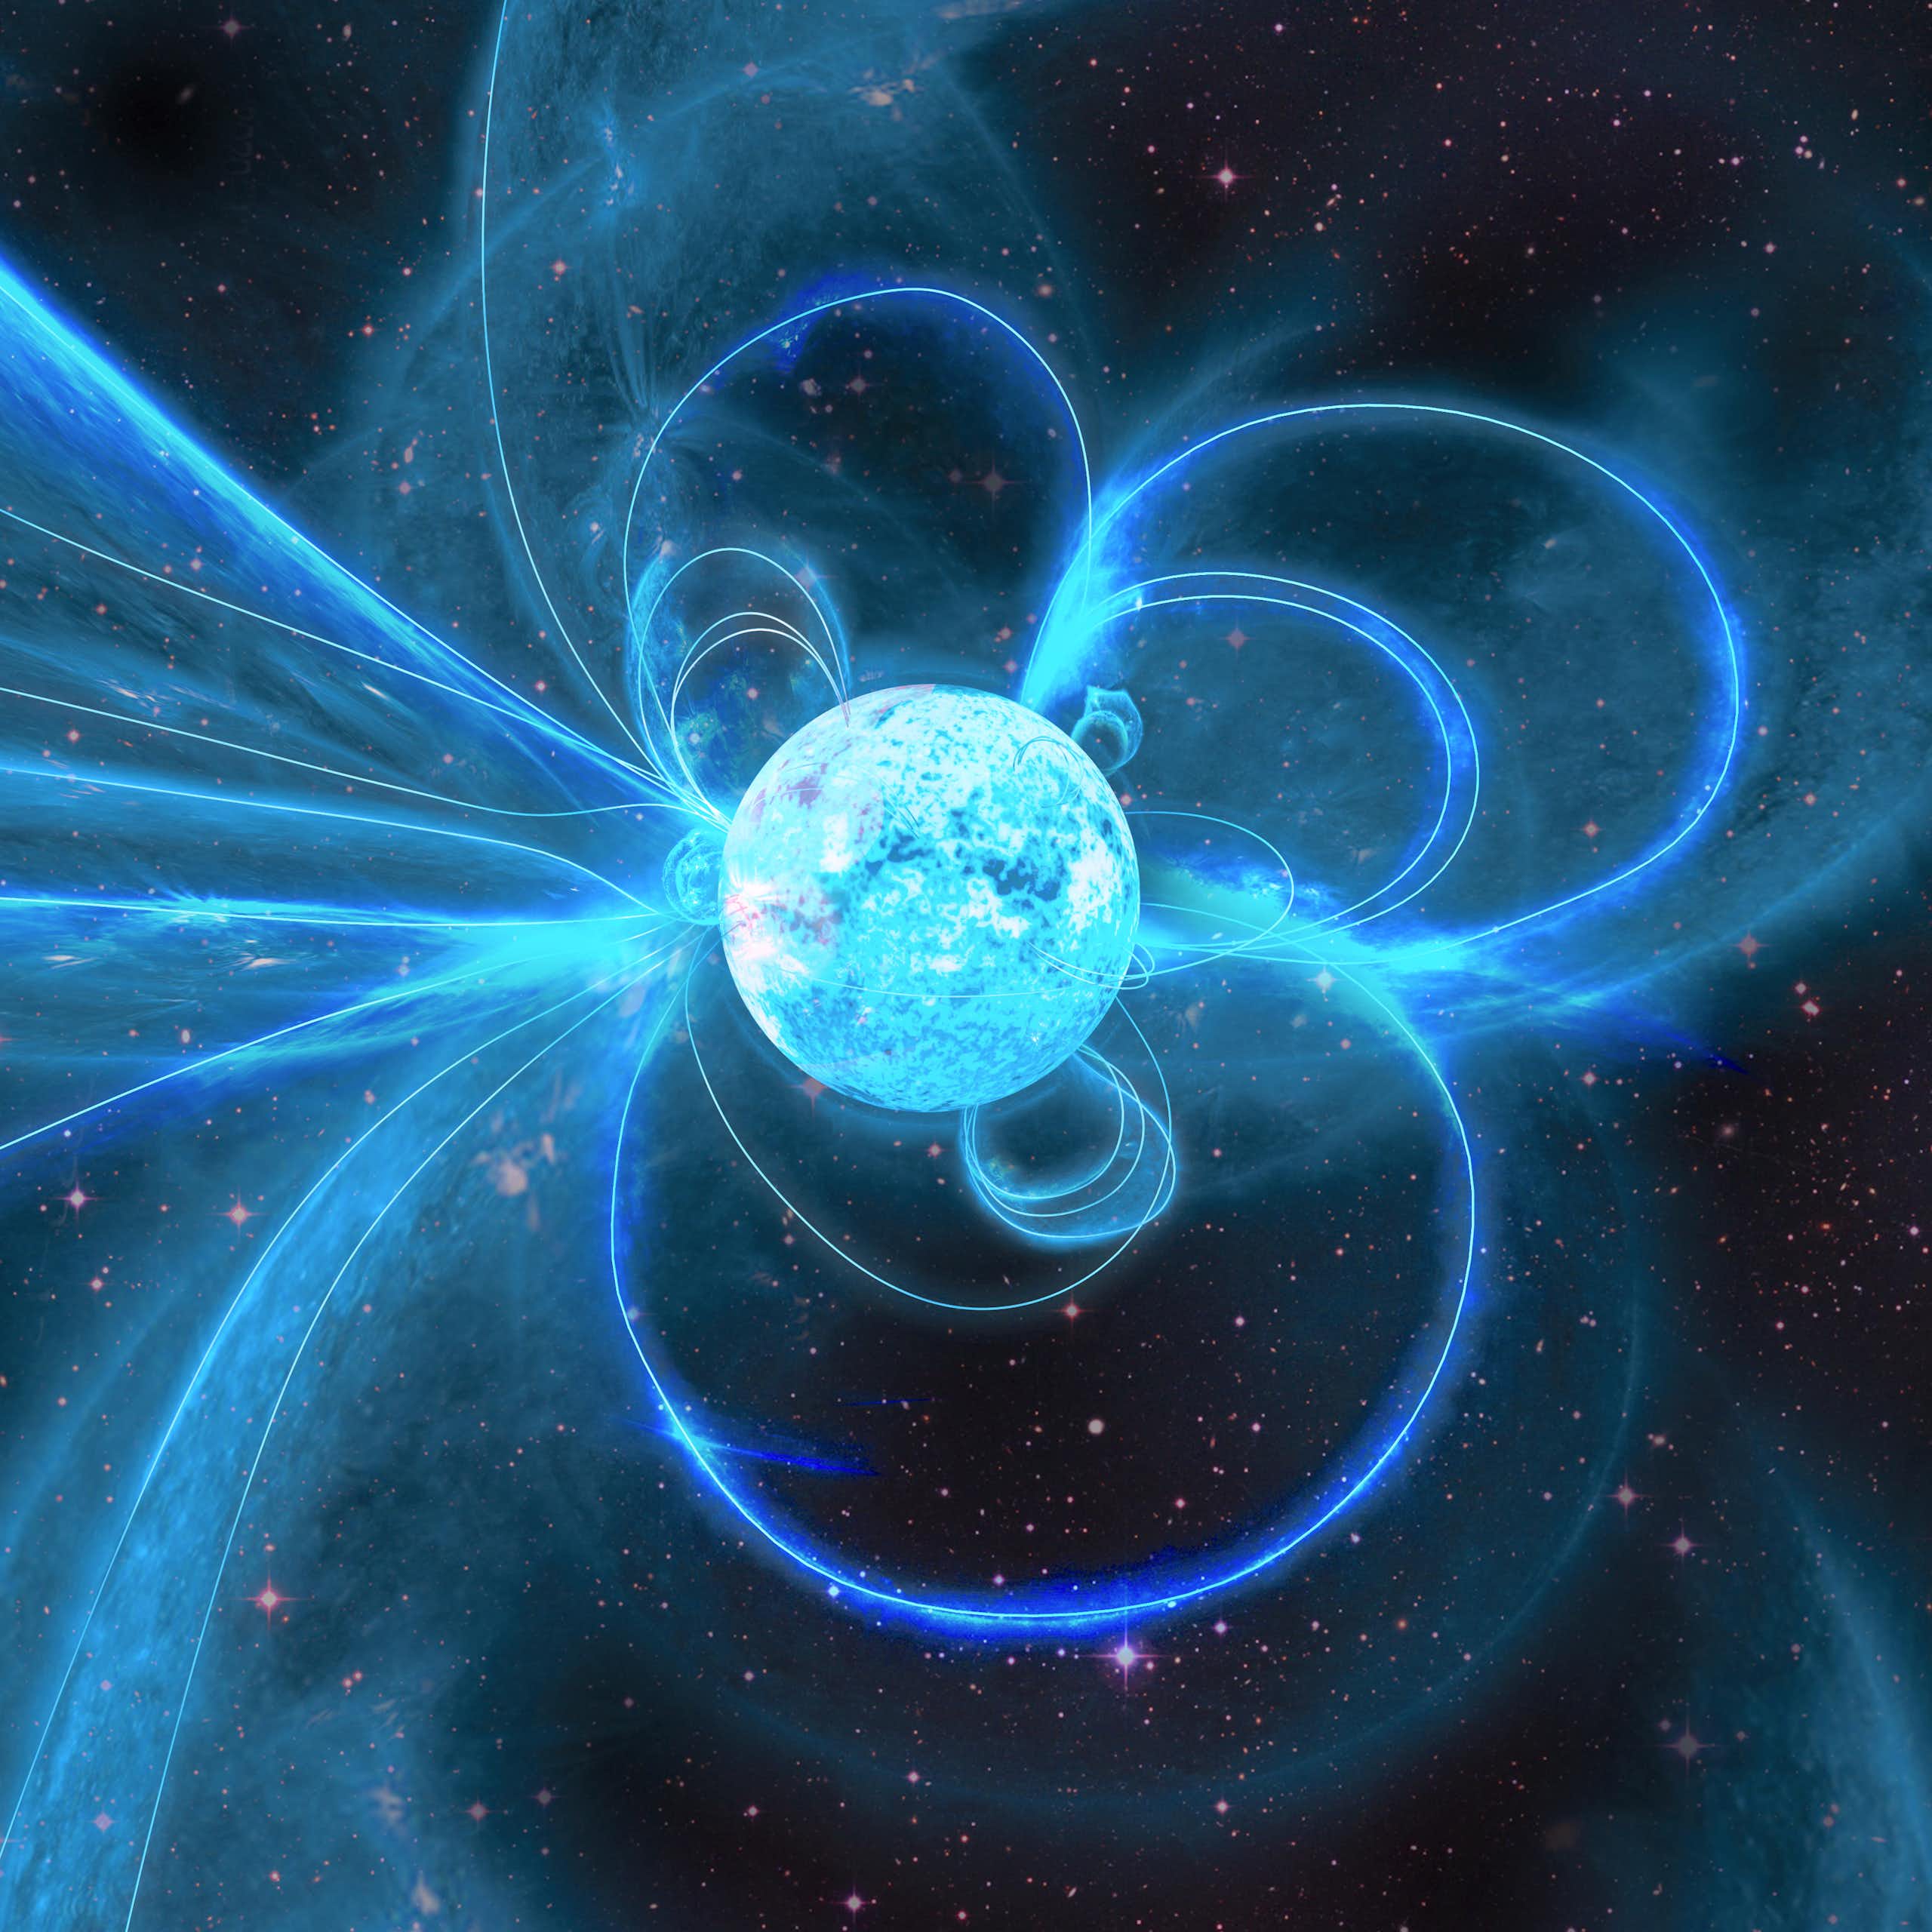 Stylised image of blue-coloured star with representations of magnetic field lines